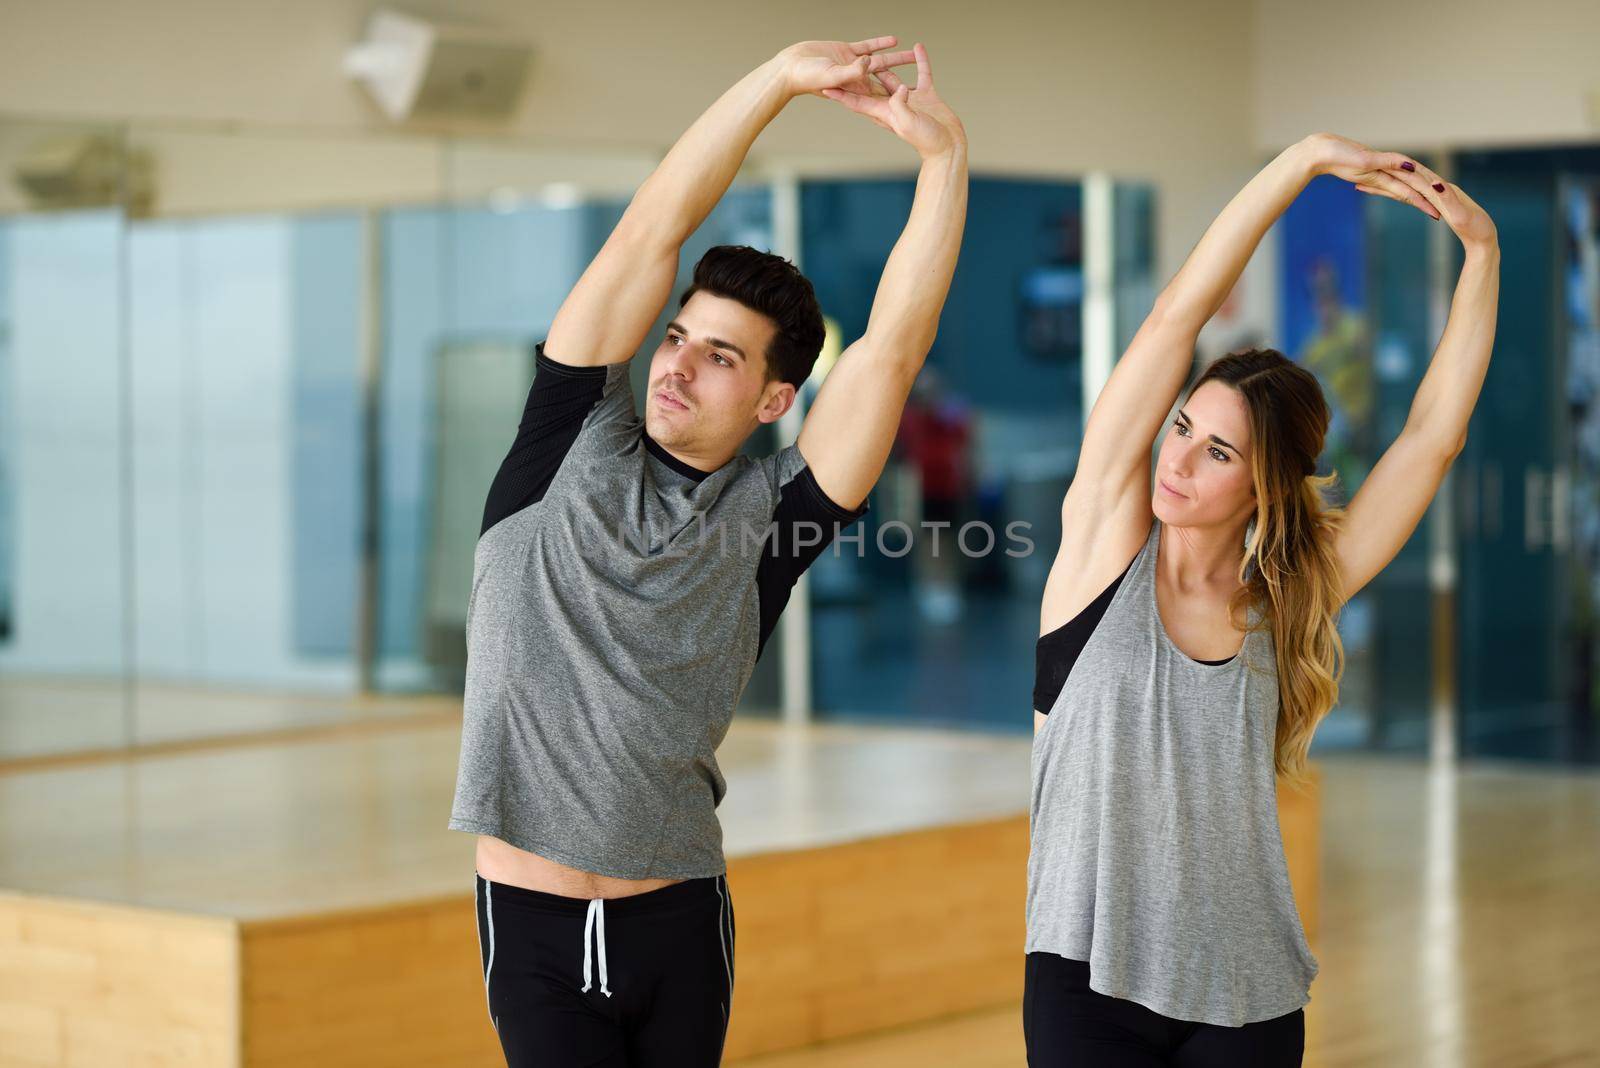 Young woman and man working out indoors. Two people stretching their arms in a gym.